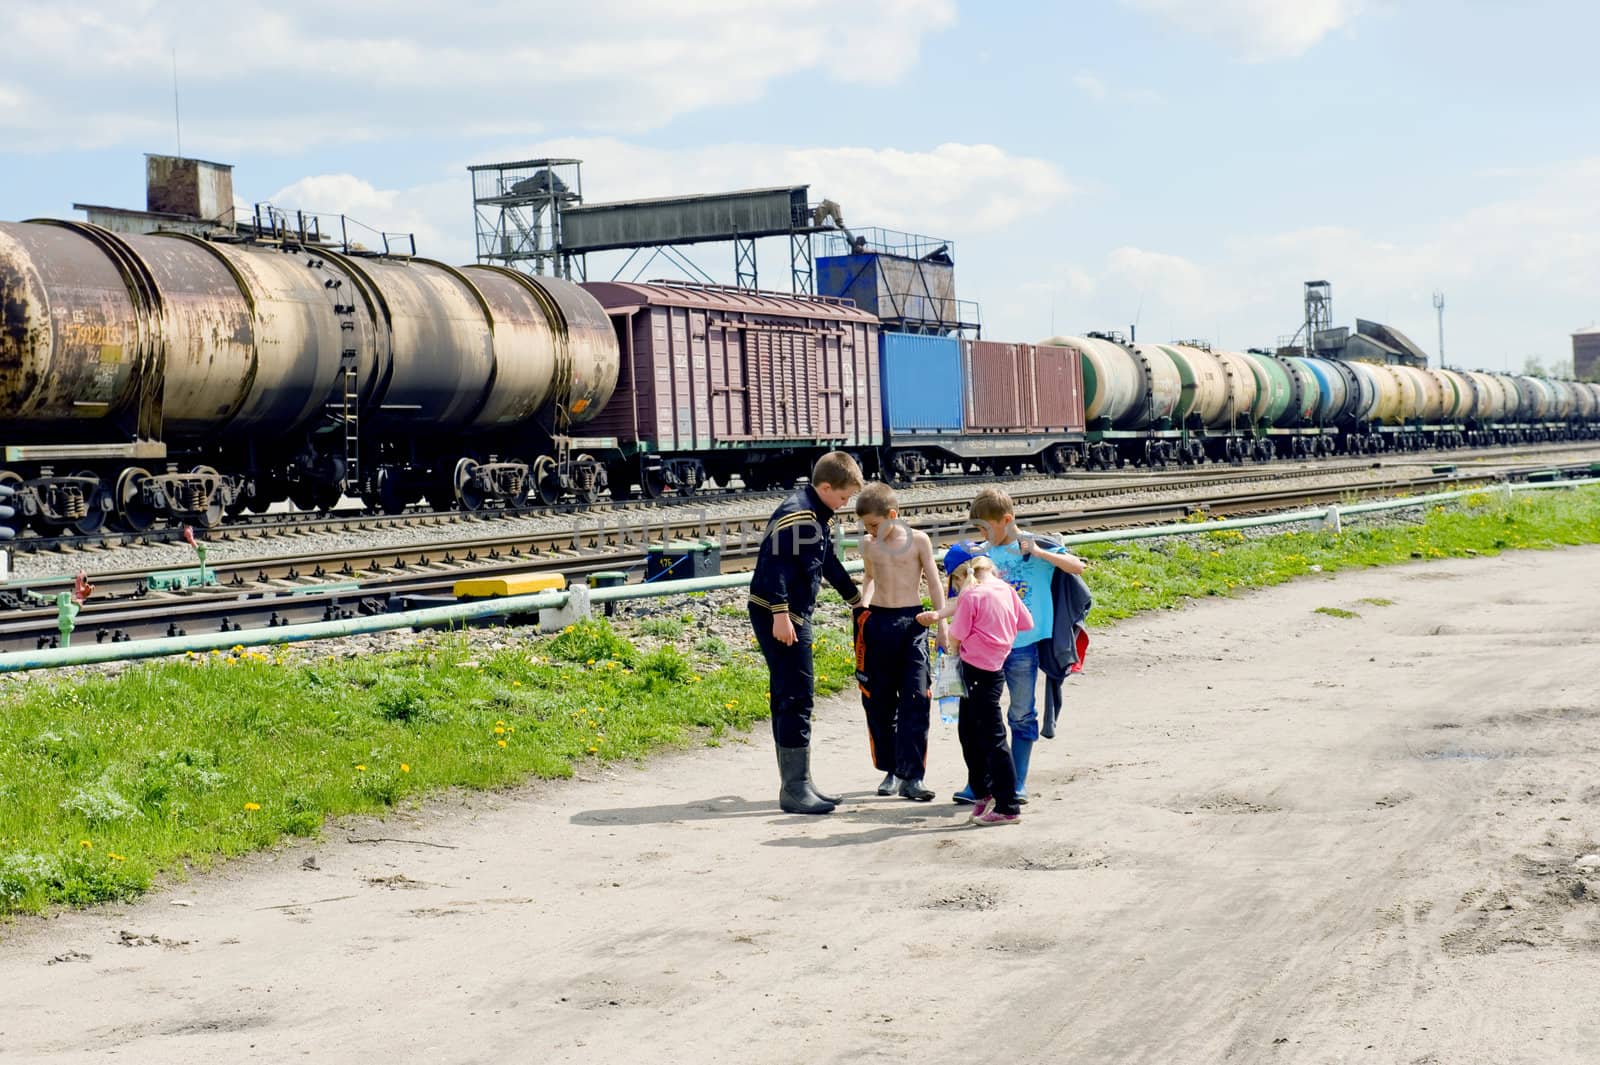 Children play near the railway, taken in Russin province on May 2011. 